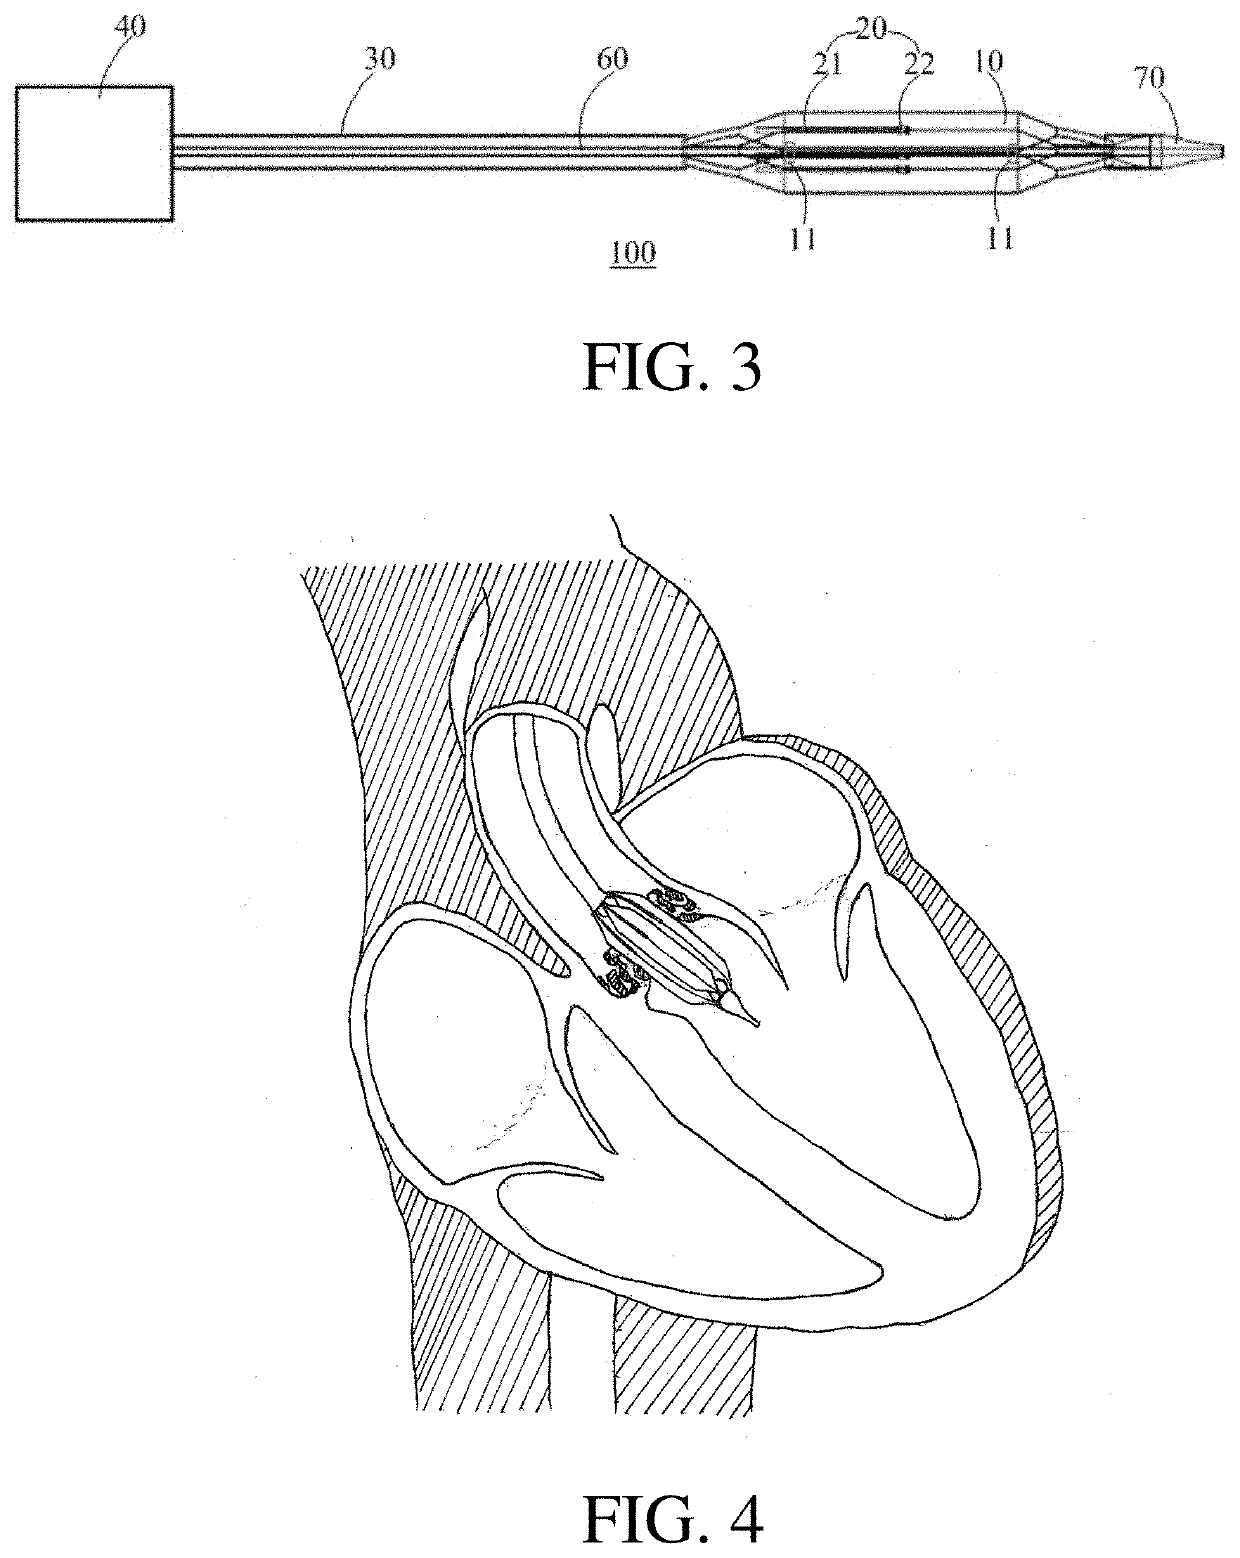 Device and method for treating heart valve or vascular calcification